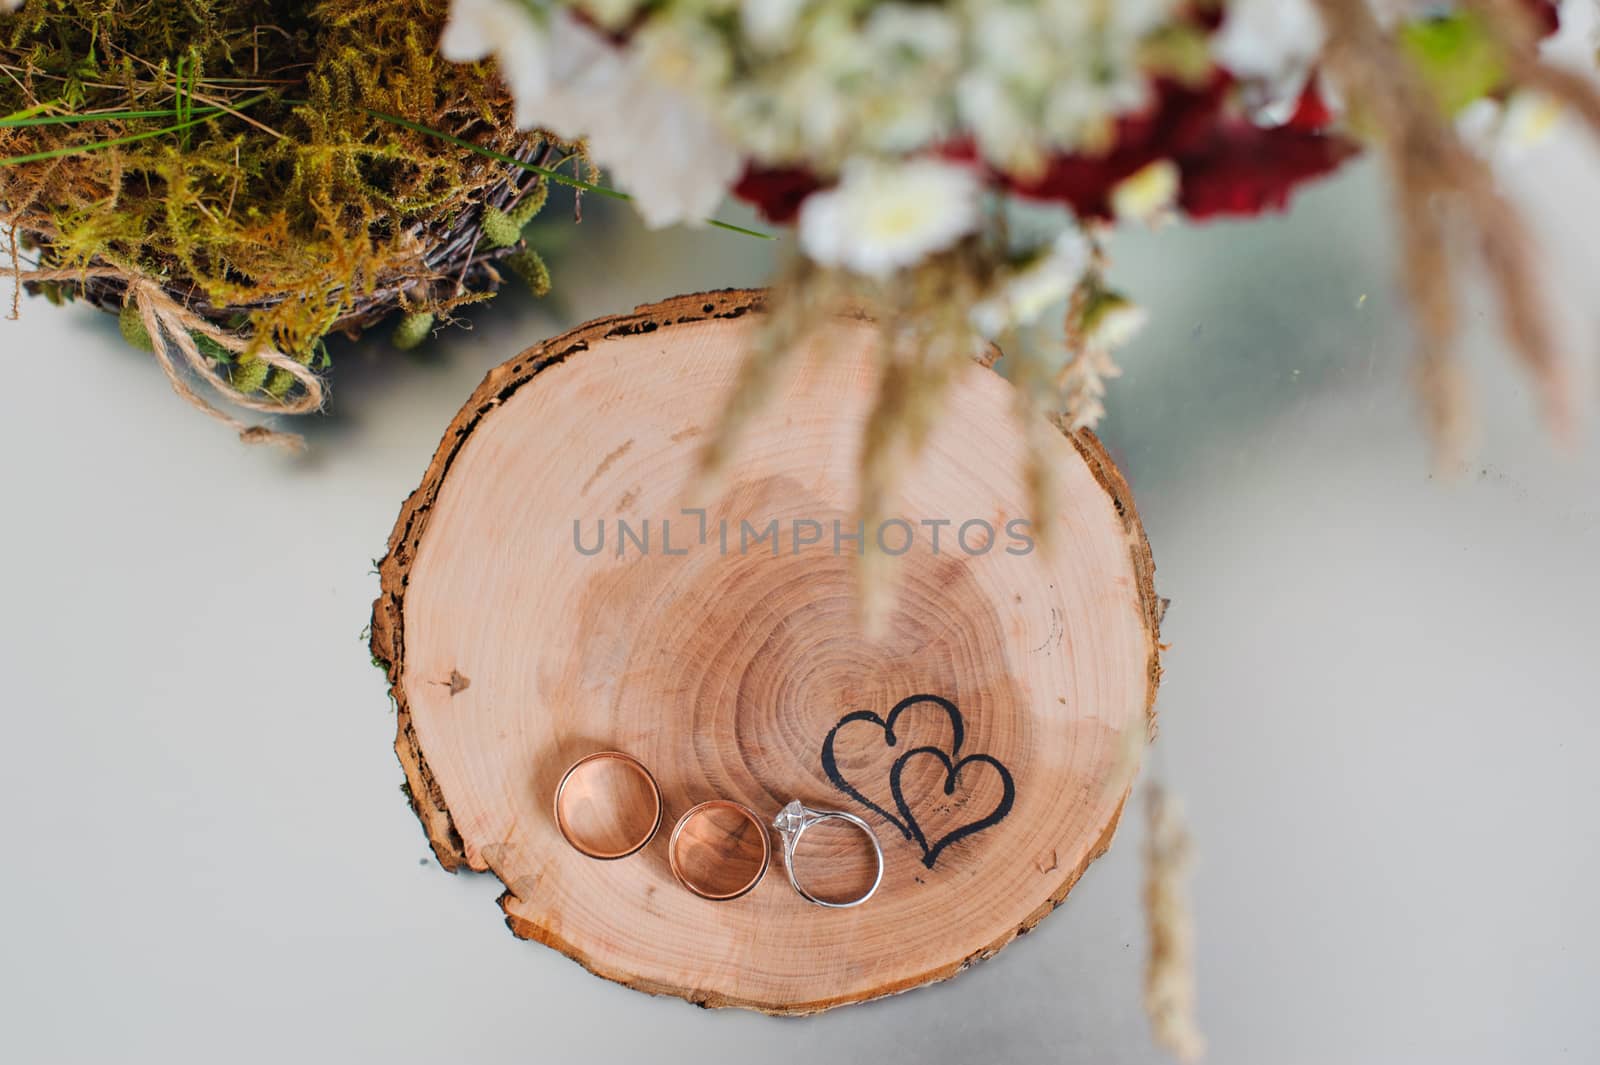 wedding rings on a wooden stump in a rustic style.